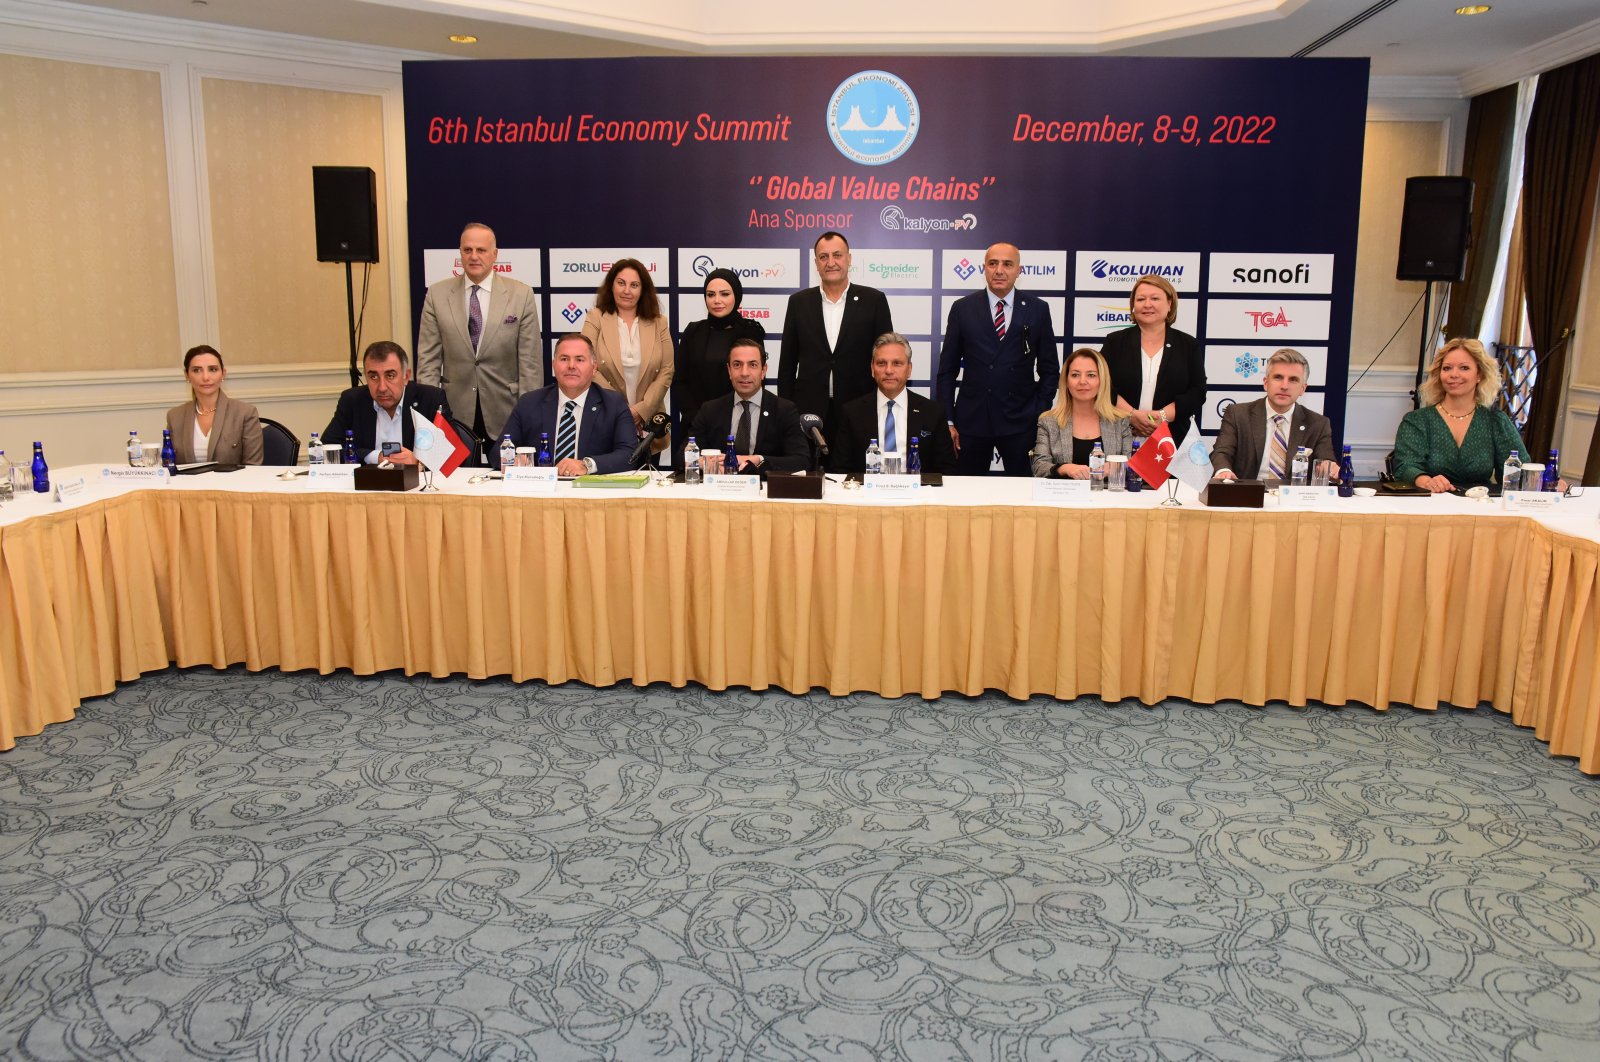 Istanbul Economic Summit Chairperson of the Executive Board Abdullah Değer (4th L) and other executives pose for a photo during a meeting, in Istanbul, Türkiye, Oct. 25, 2022. (Courtesy of Istanbul Economy Summit)